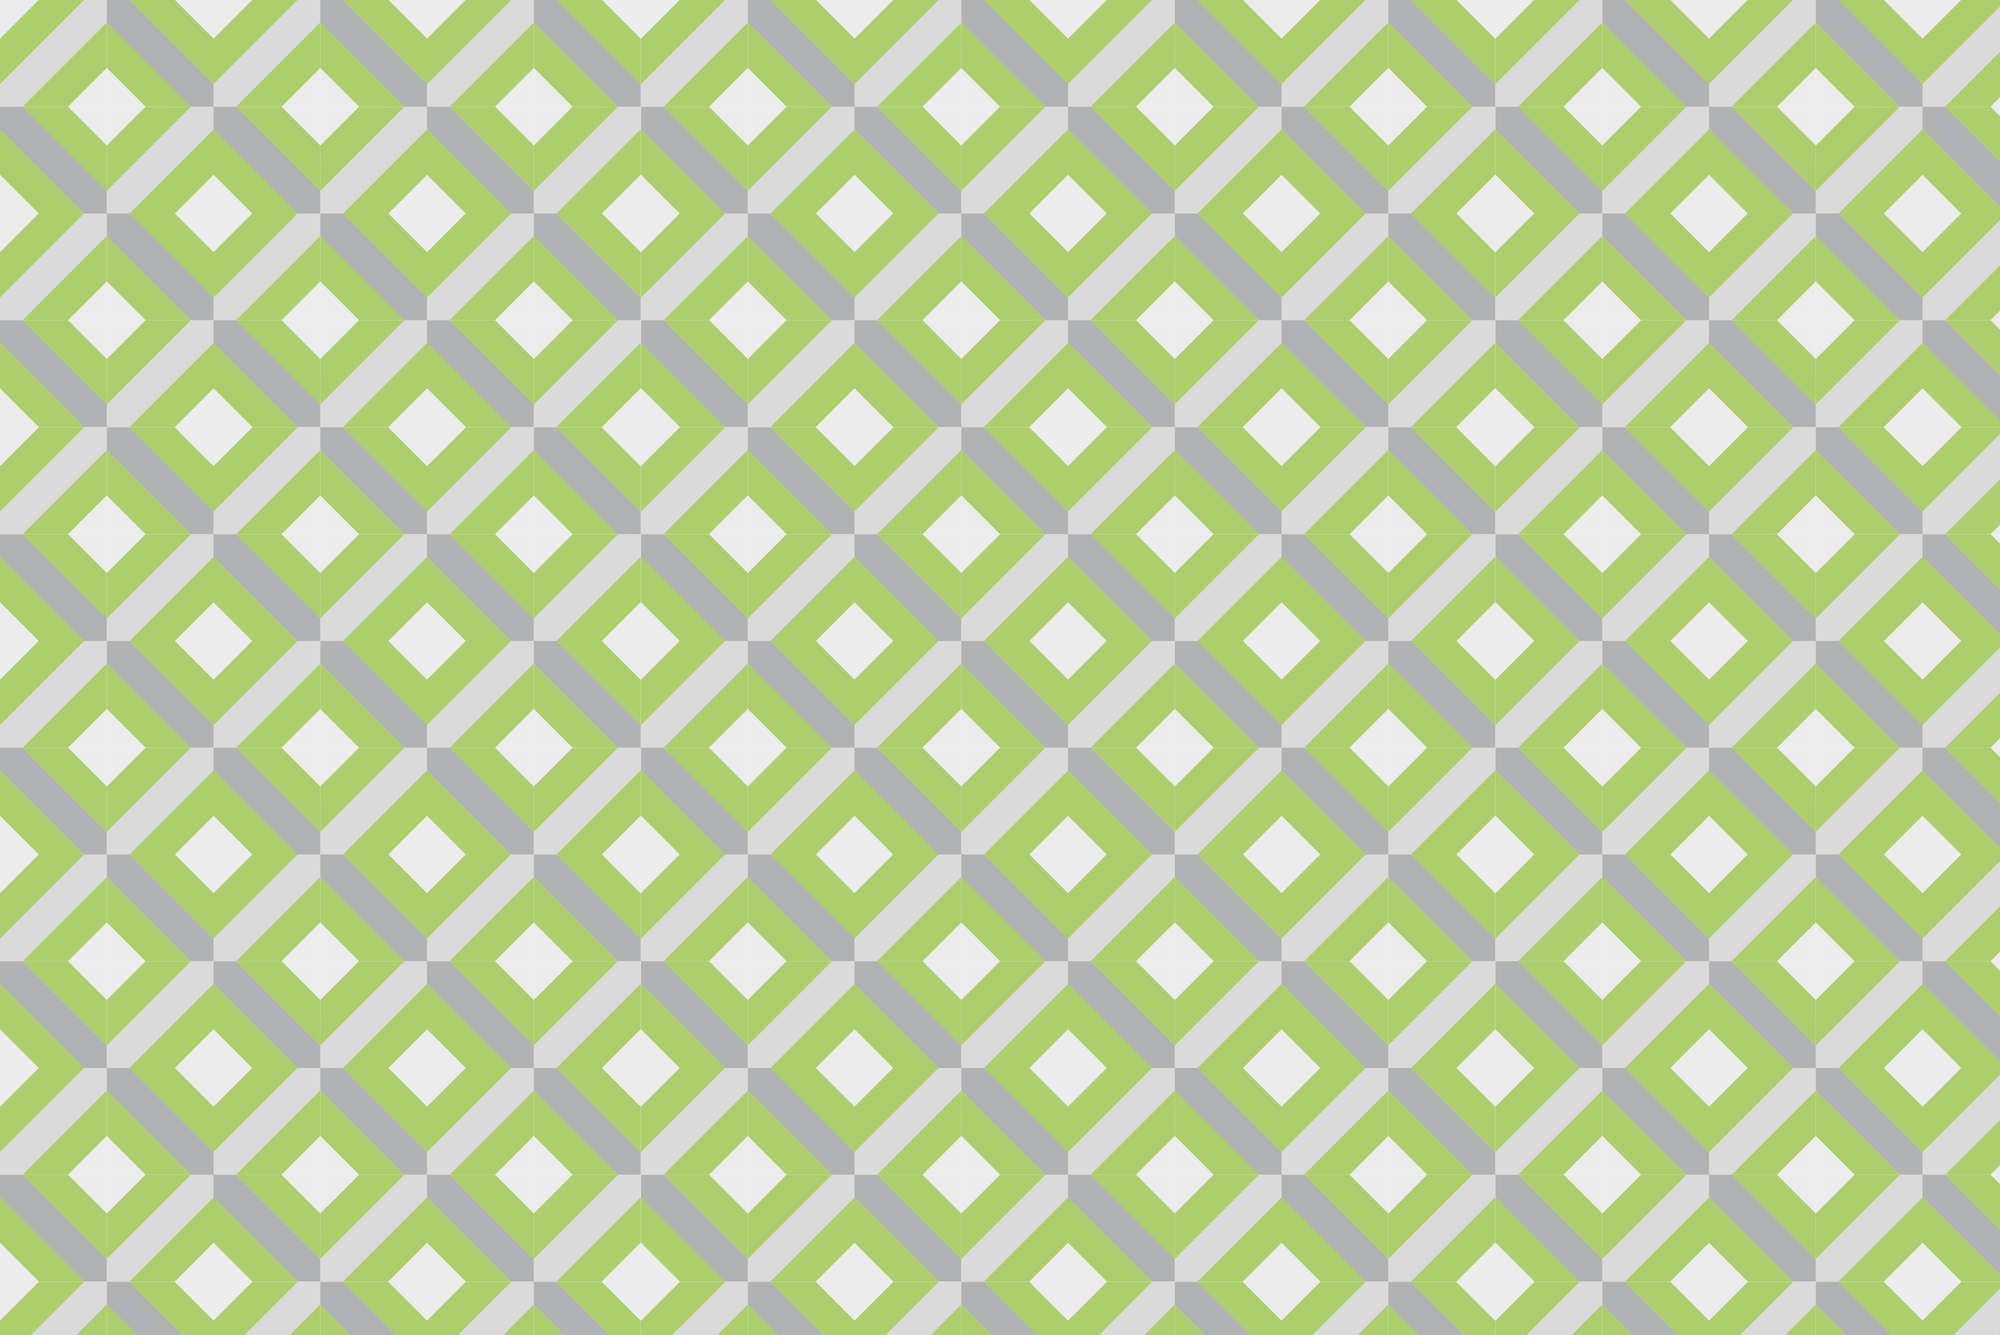             Design wall mural box motif with small squares green on premium smooth non-woven
        